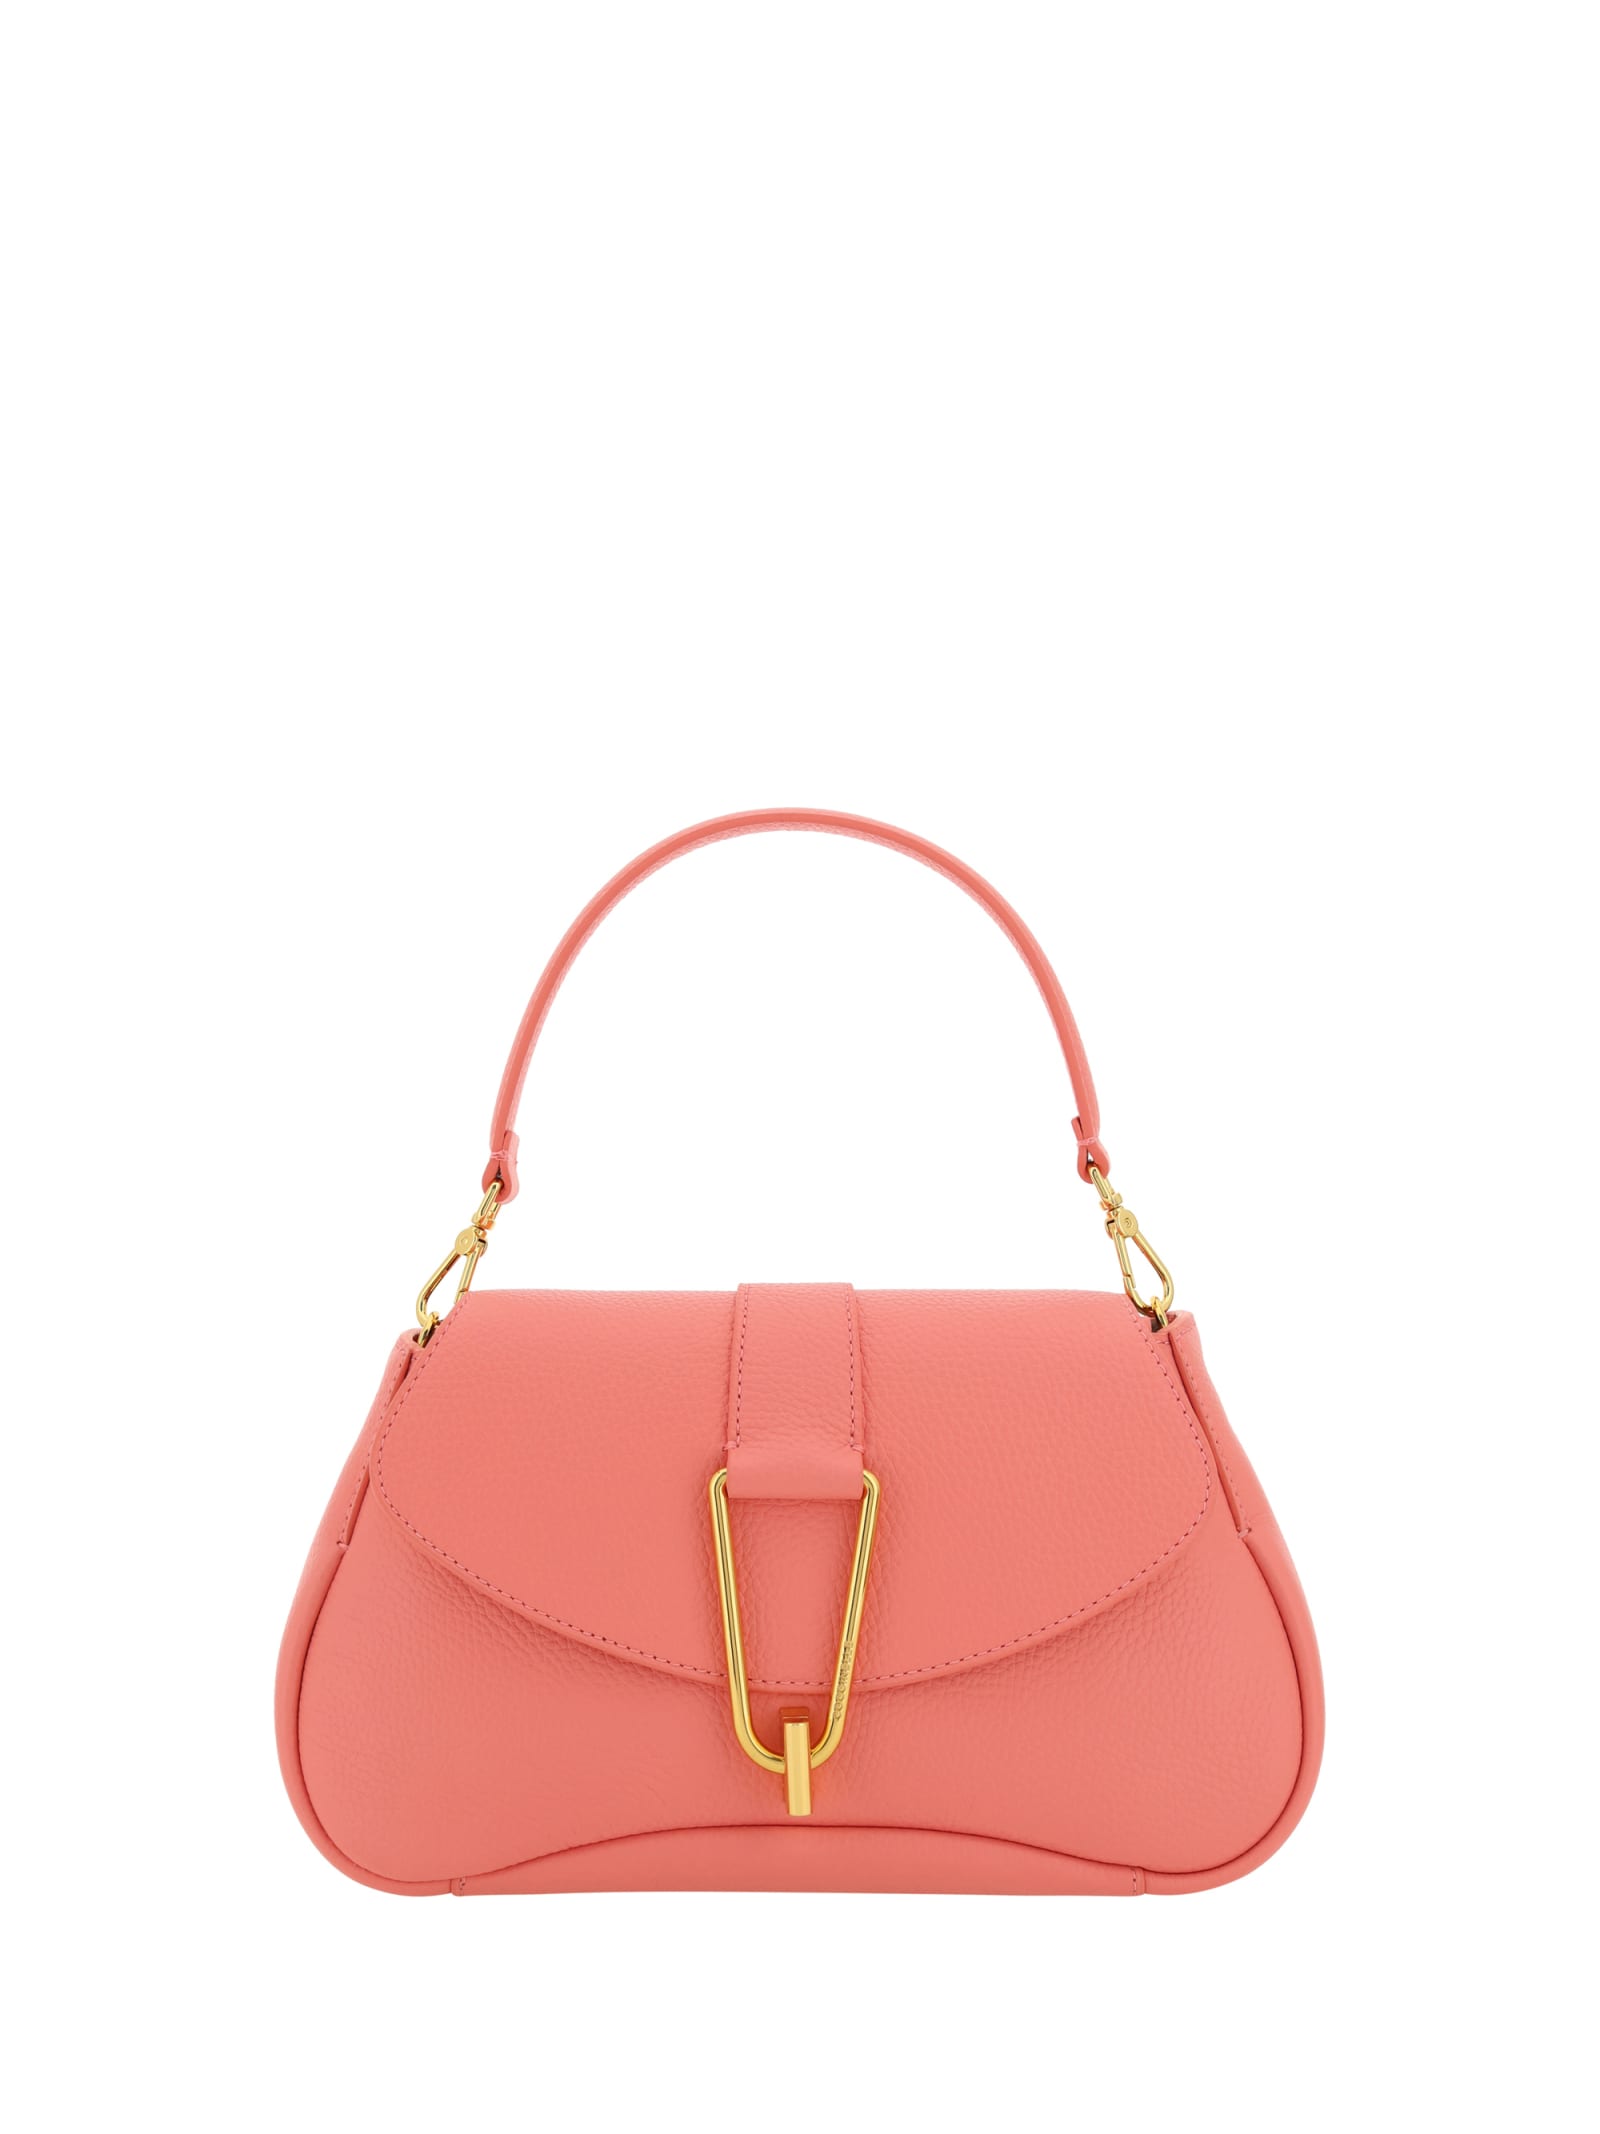 Coccinelle Mini Neofirenze Soft Top-Handle Bag - Red